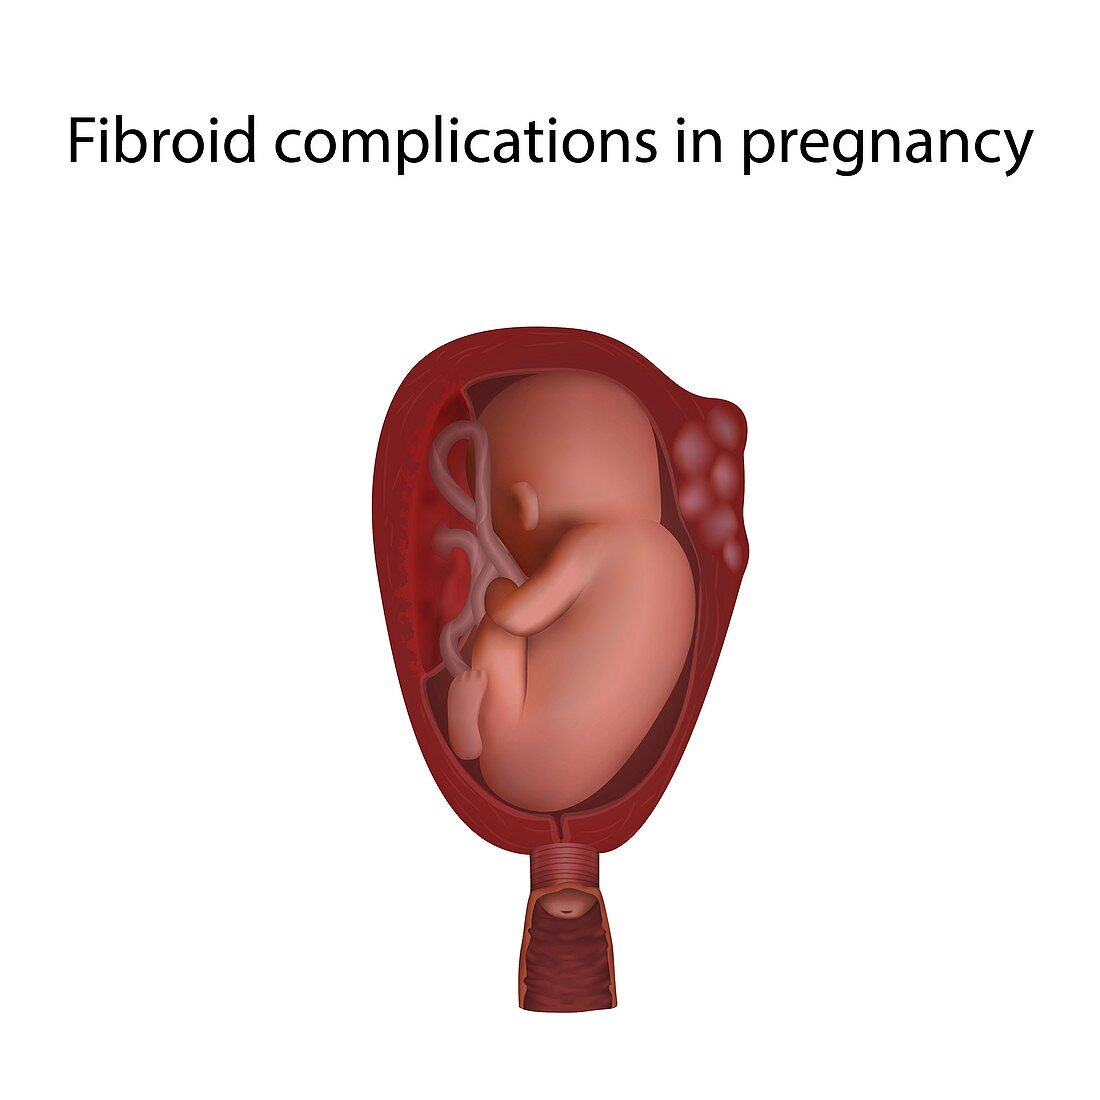 Fibroid complications in pregnancy, illustration